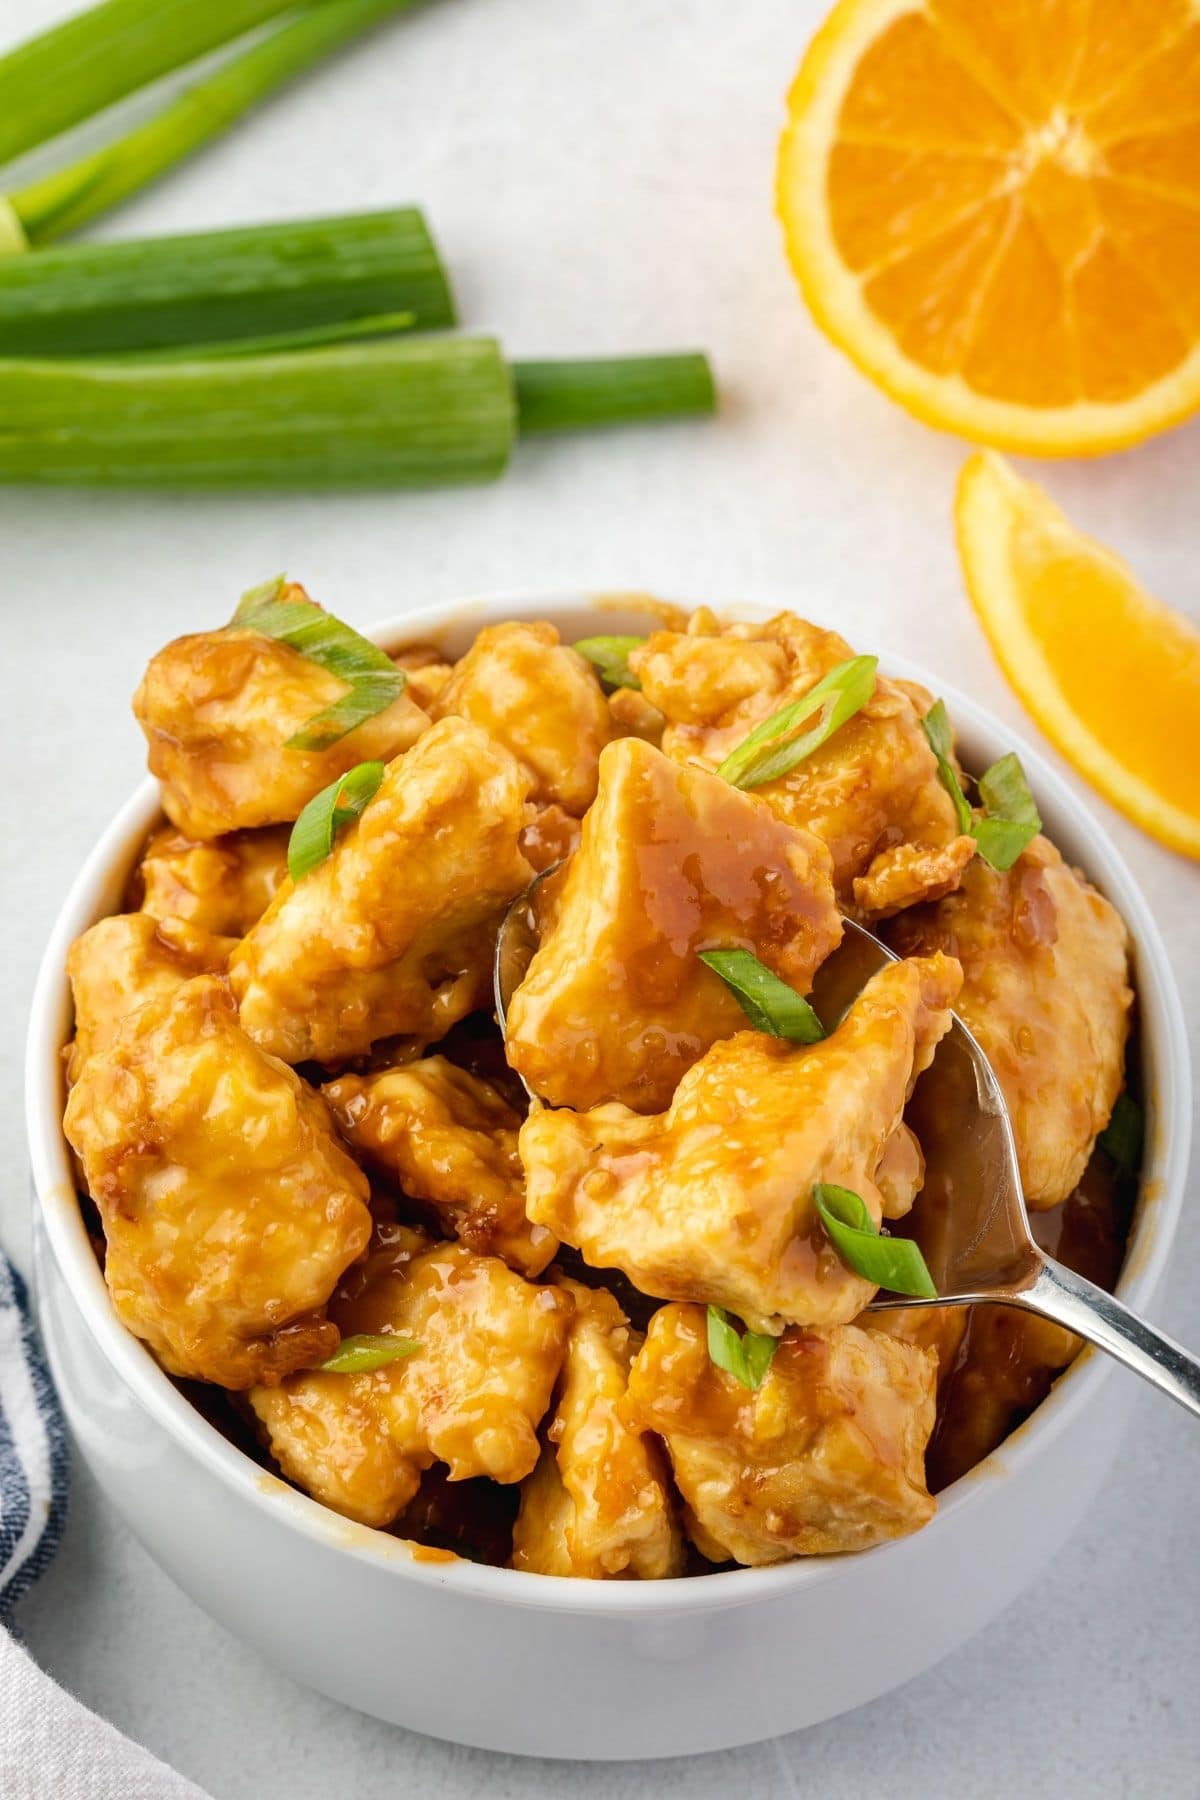 Bowl of orange chicken with piece on fork, green onions and orange half on top.